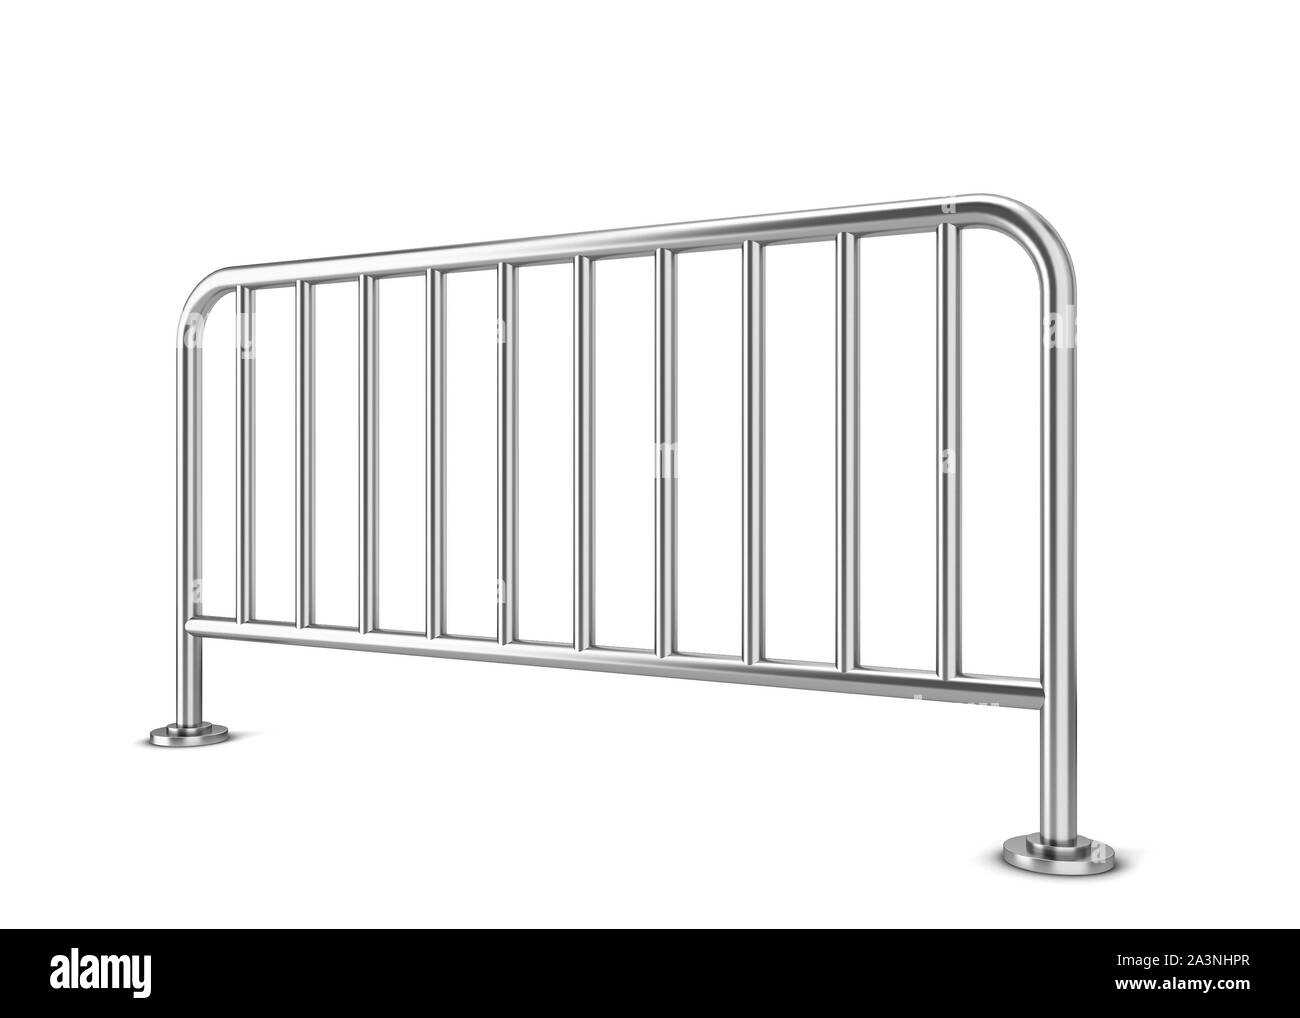 Metal barrier. 3d illustration isolated on white background Stock Photo